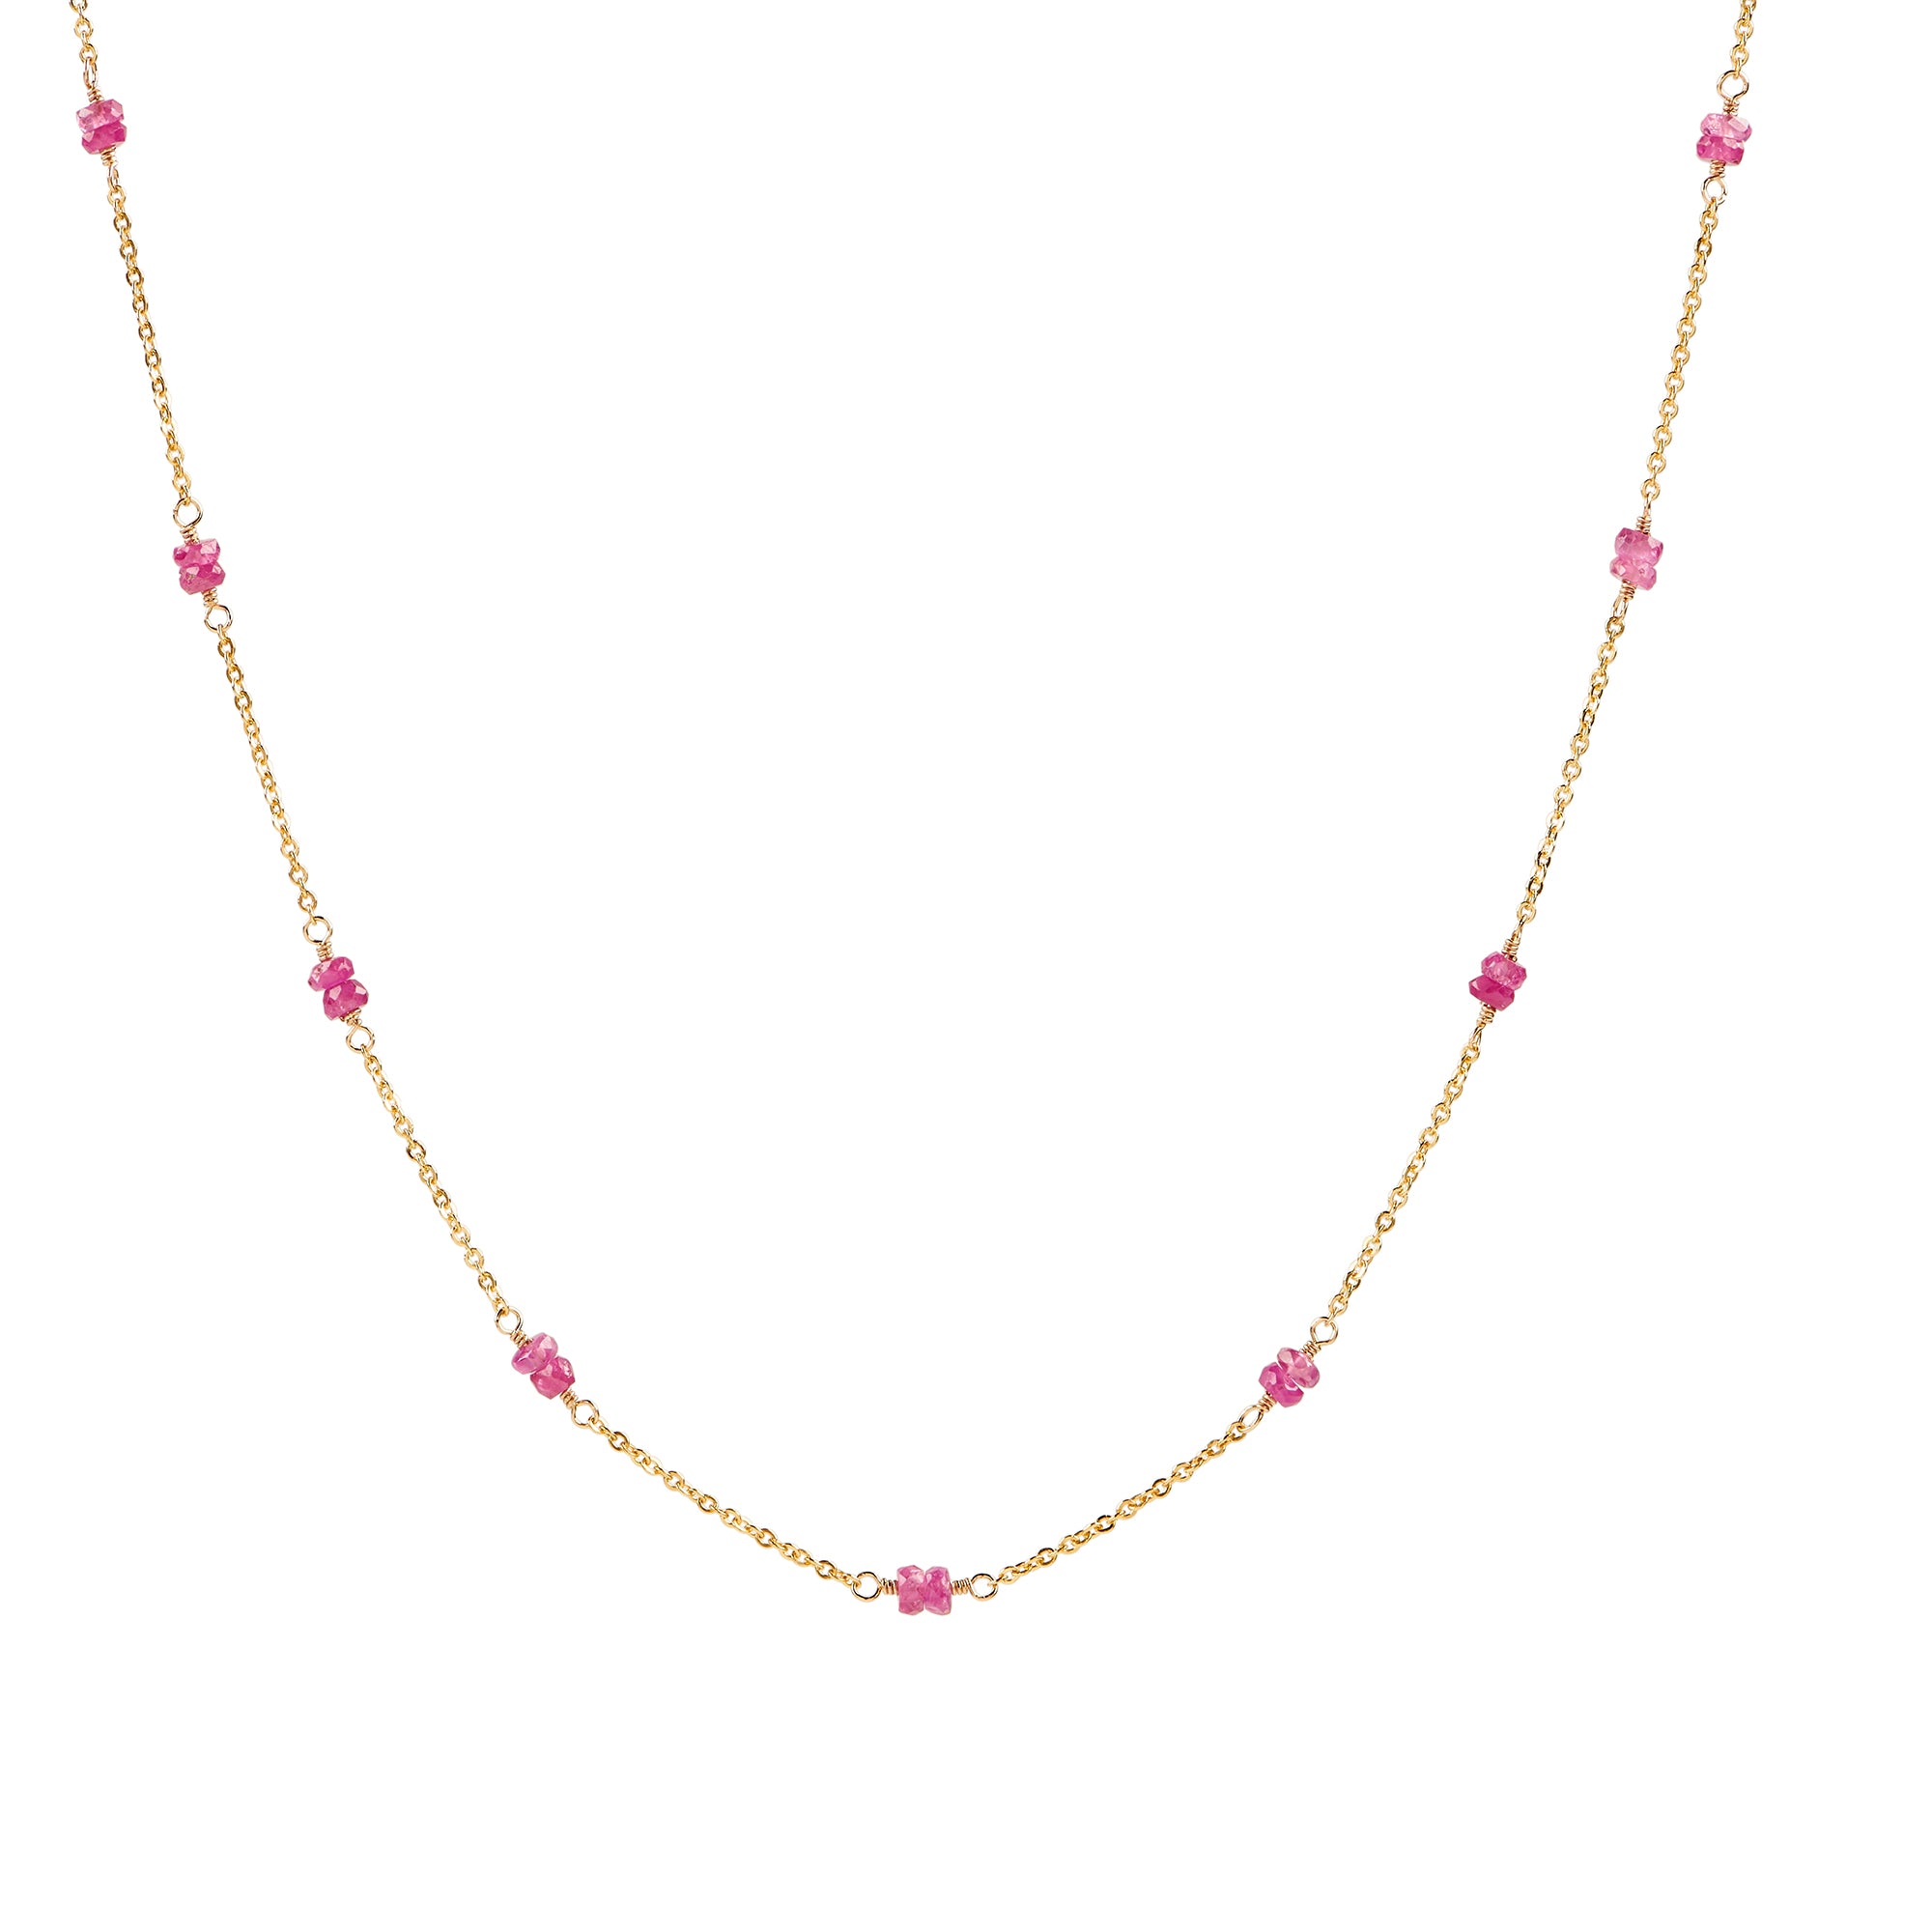 PINK SAPPHIRE AND DIAMOND FLOWER NECKLACE — Sandy Moss Jewelry